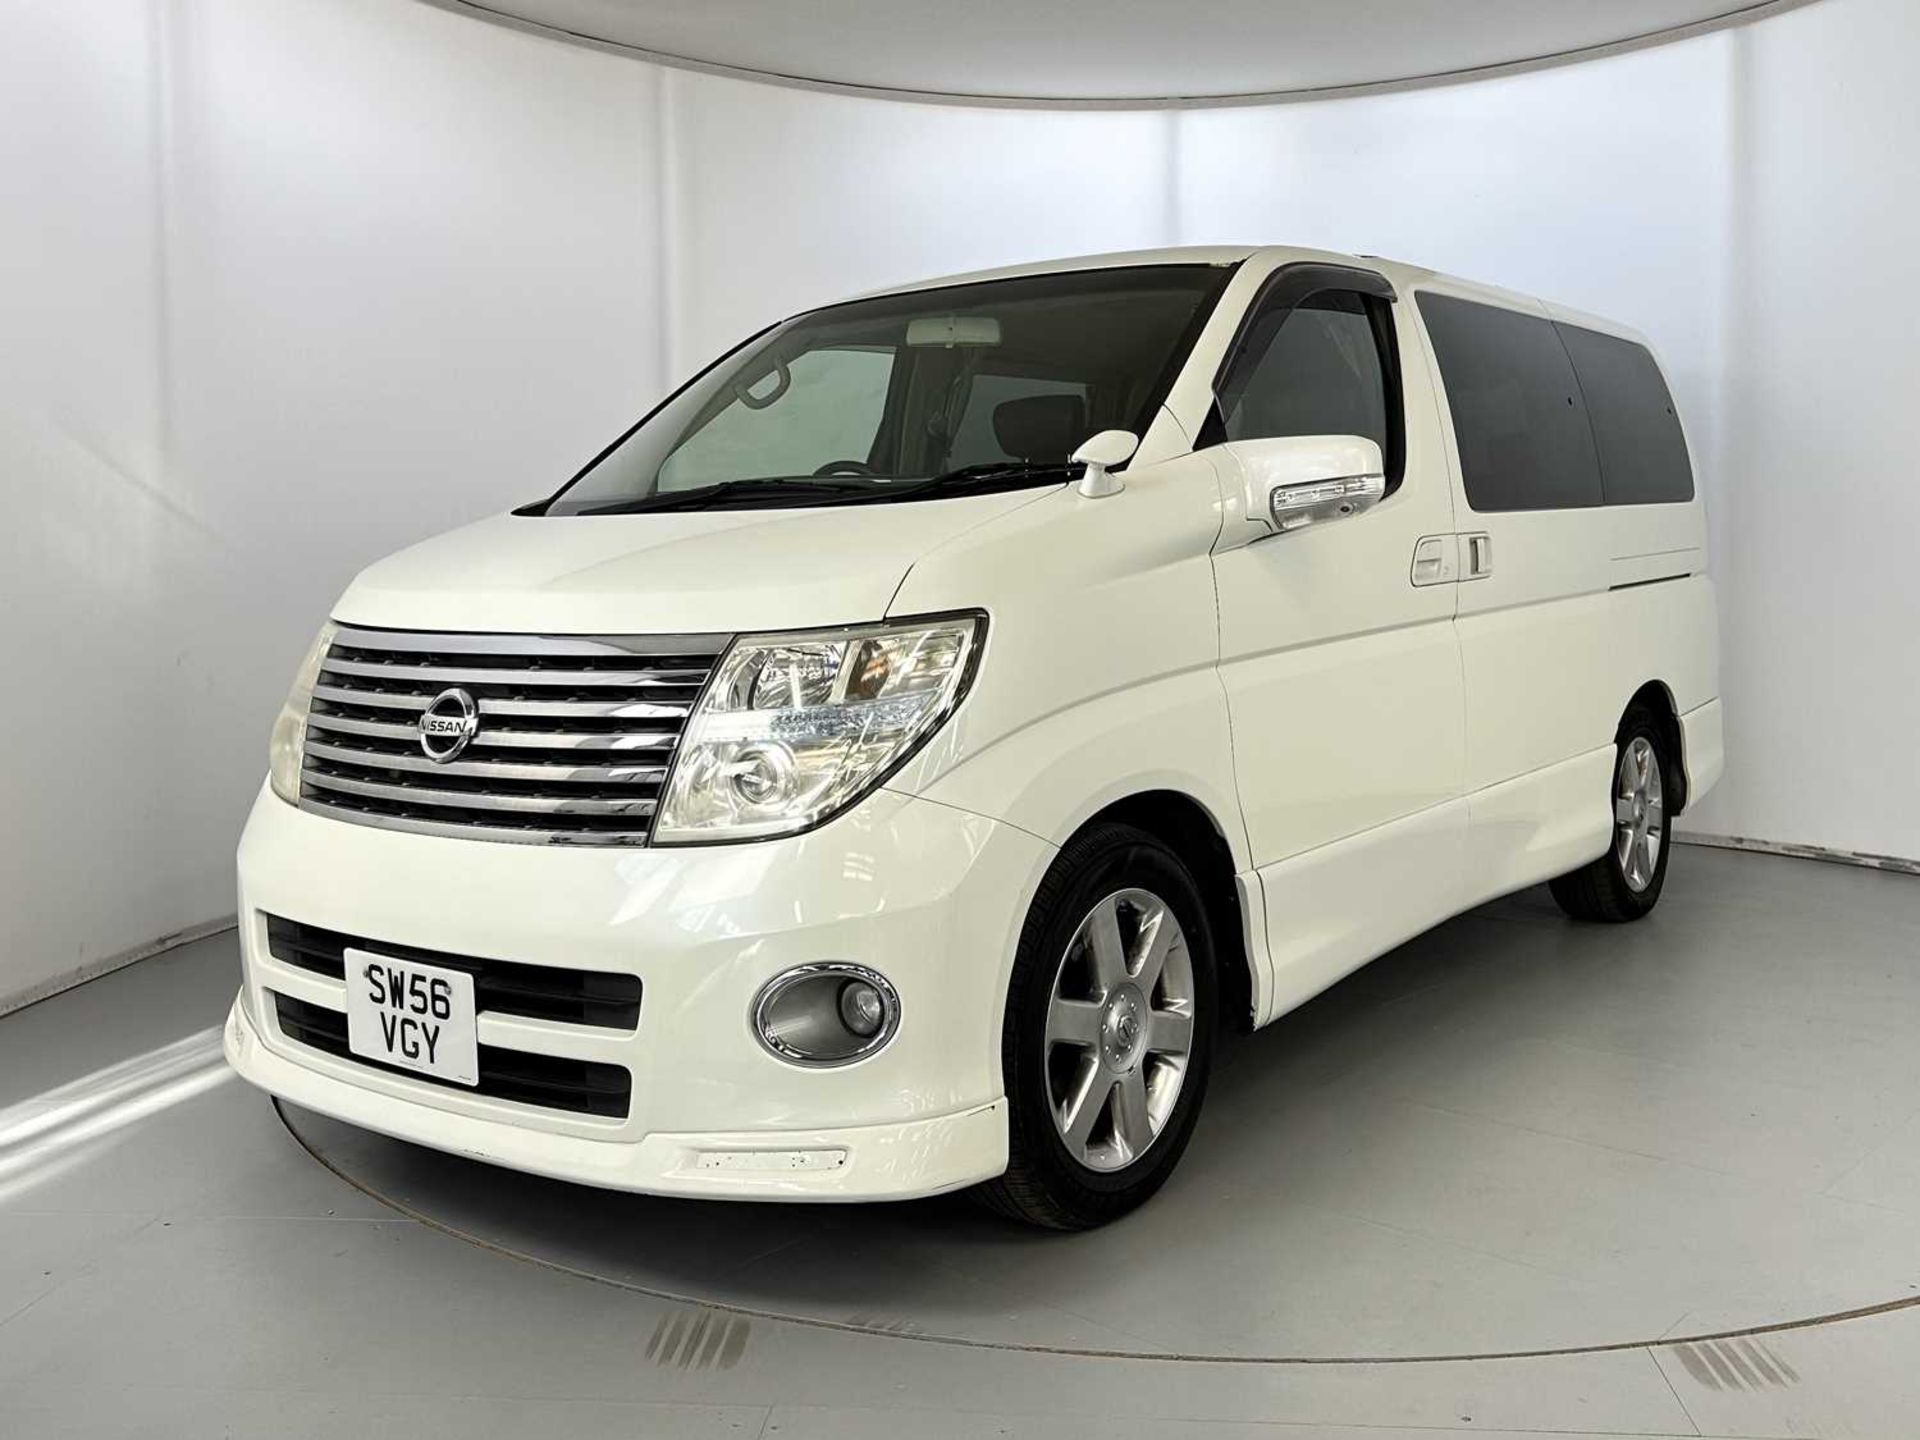 2007 Nissan Elgrand - Highway Star Edition 4WD - Image 3 of 39